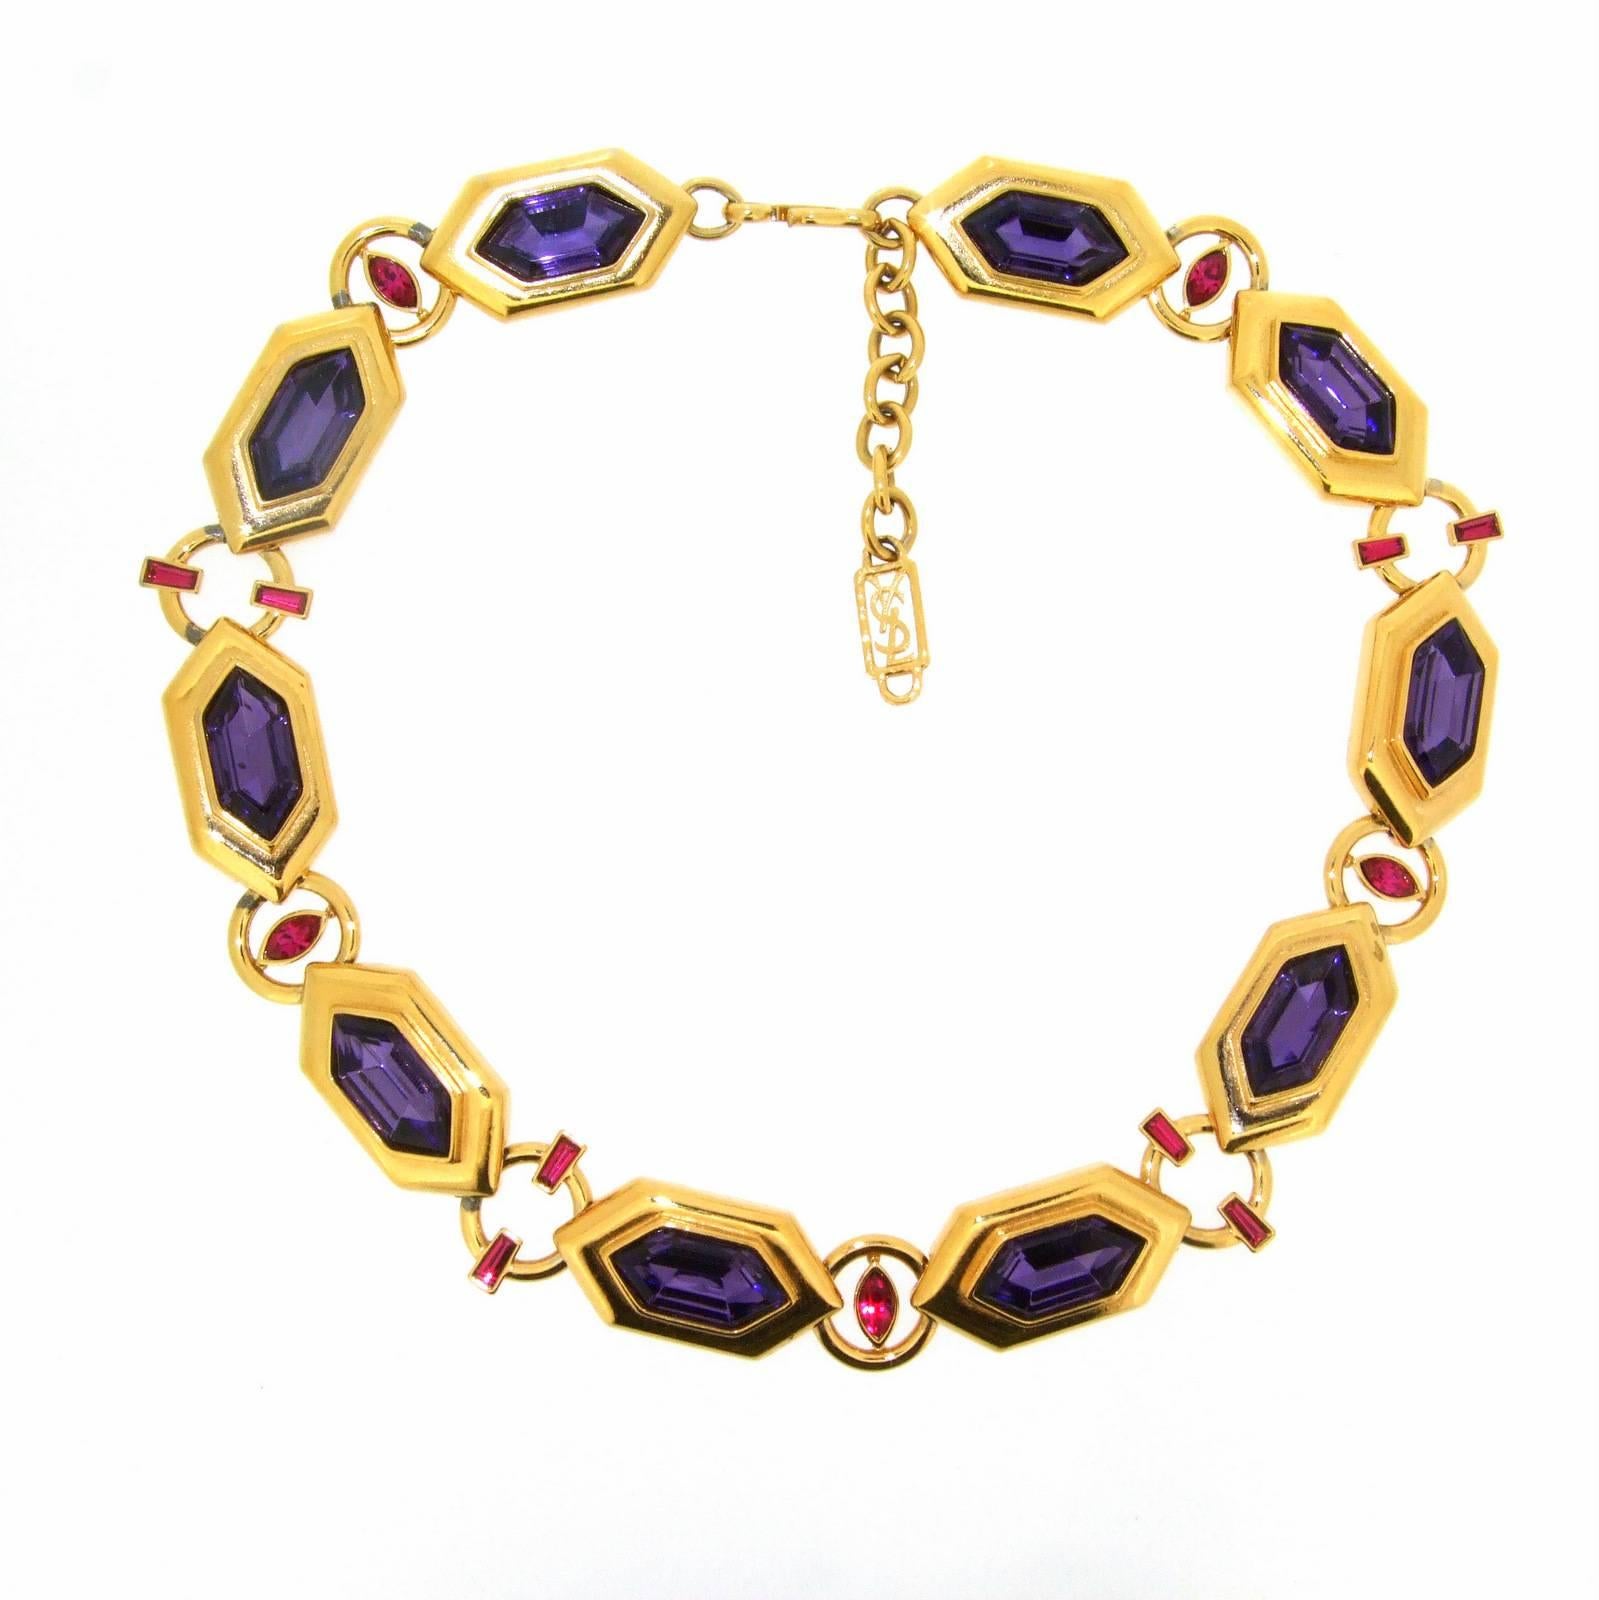 A fabulous Vintage Necklace by Yves Saint Laurent (YSL). Purple and ruby red crystal glass faceted stones set on a gold plated costume metal. It measures 18-20 inches in length, each section with a purple stone is 3.5cm long and 2cm wide.